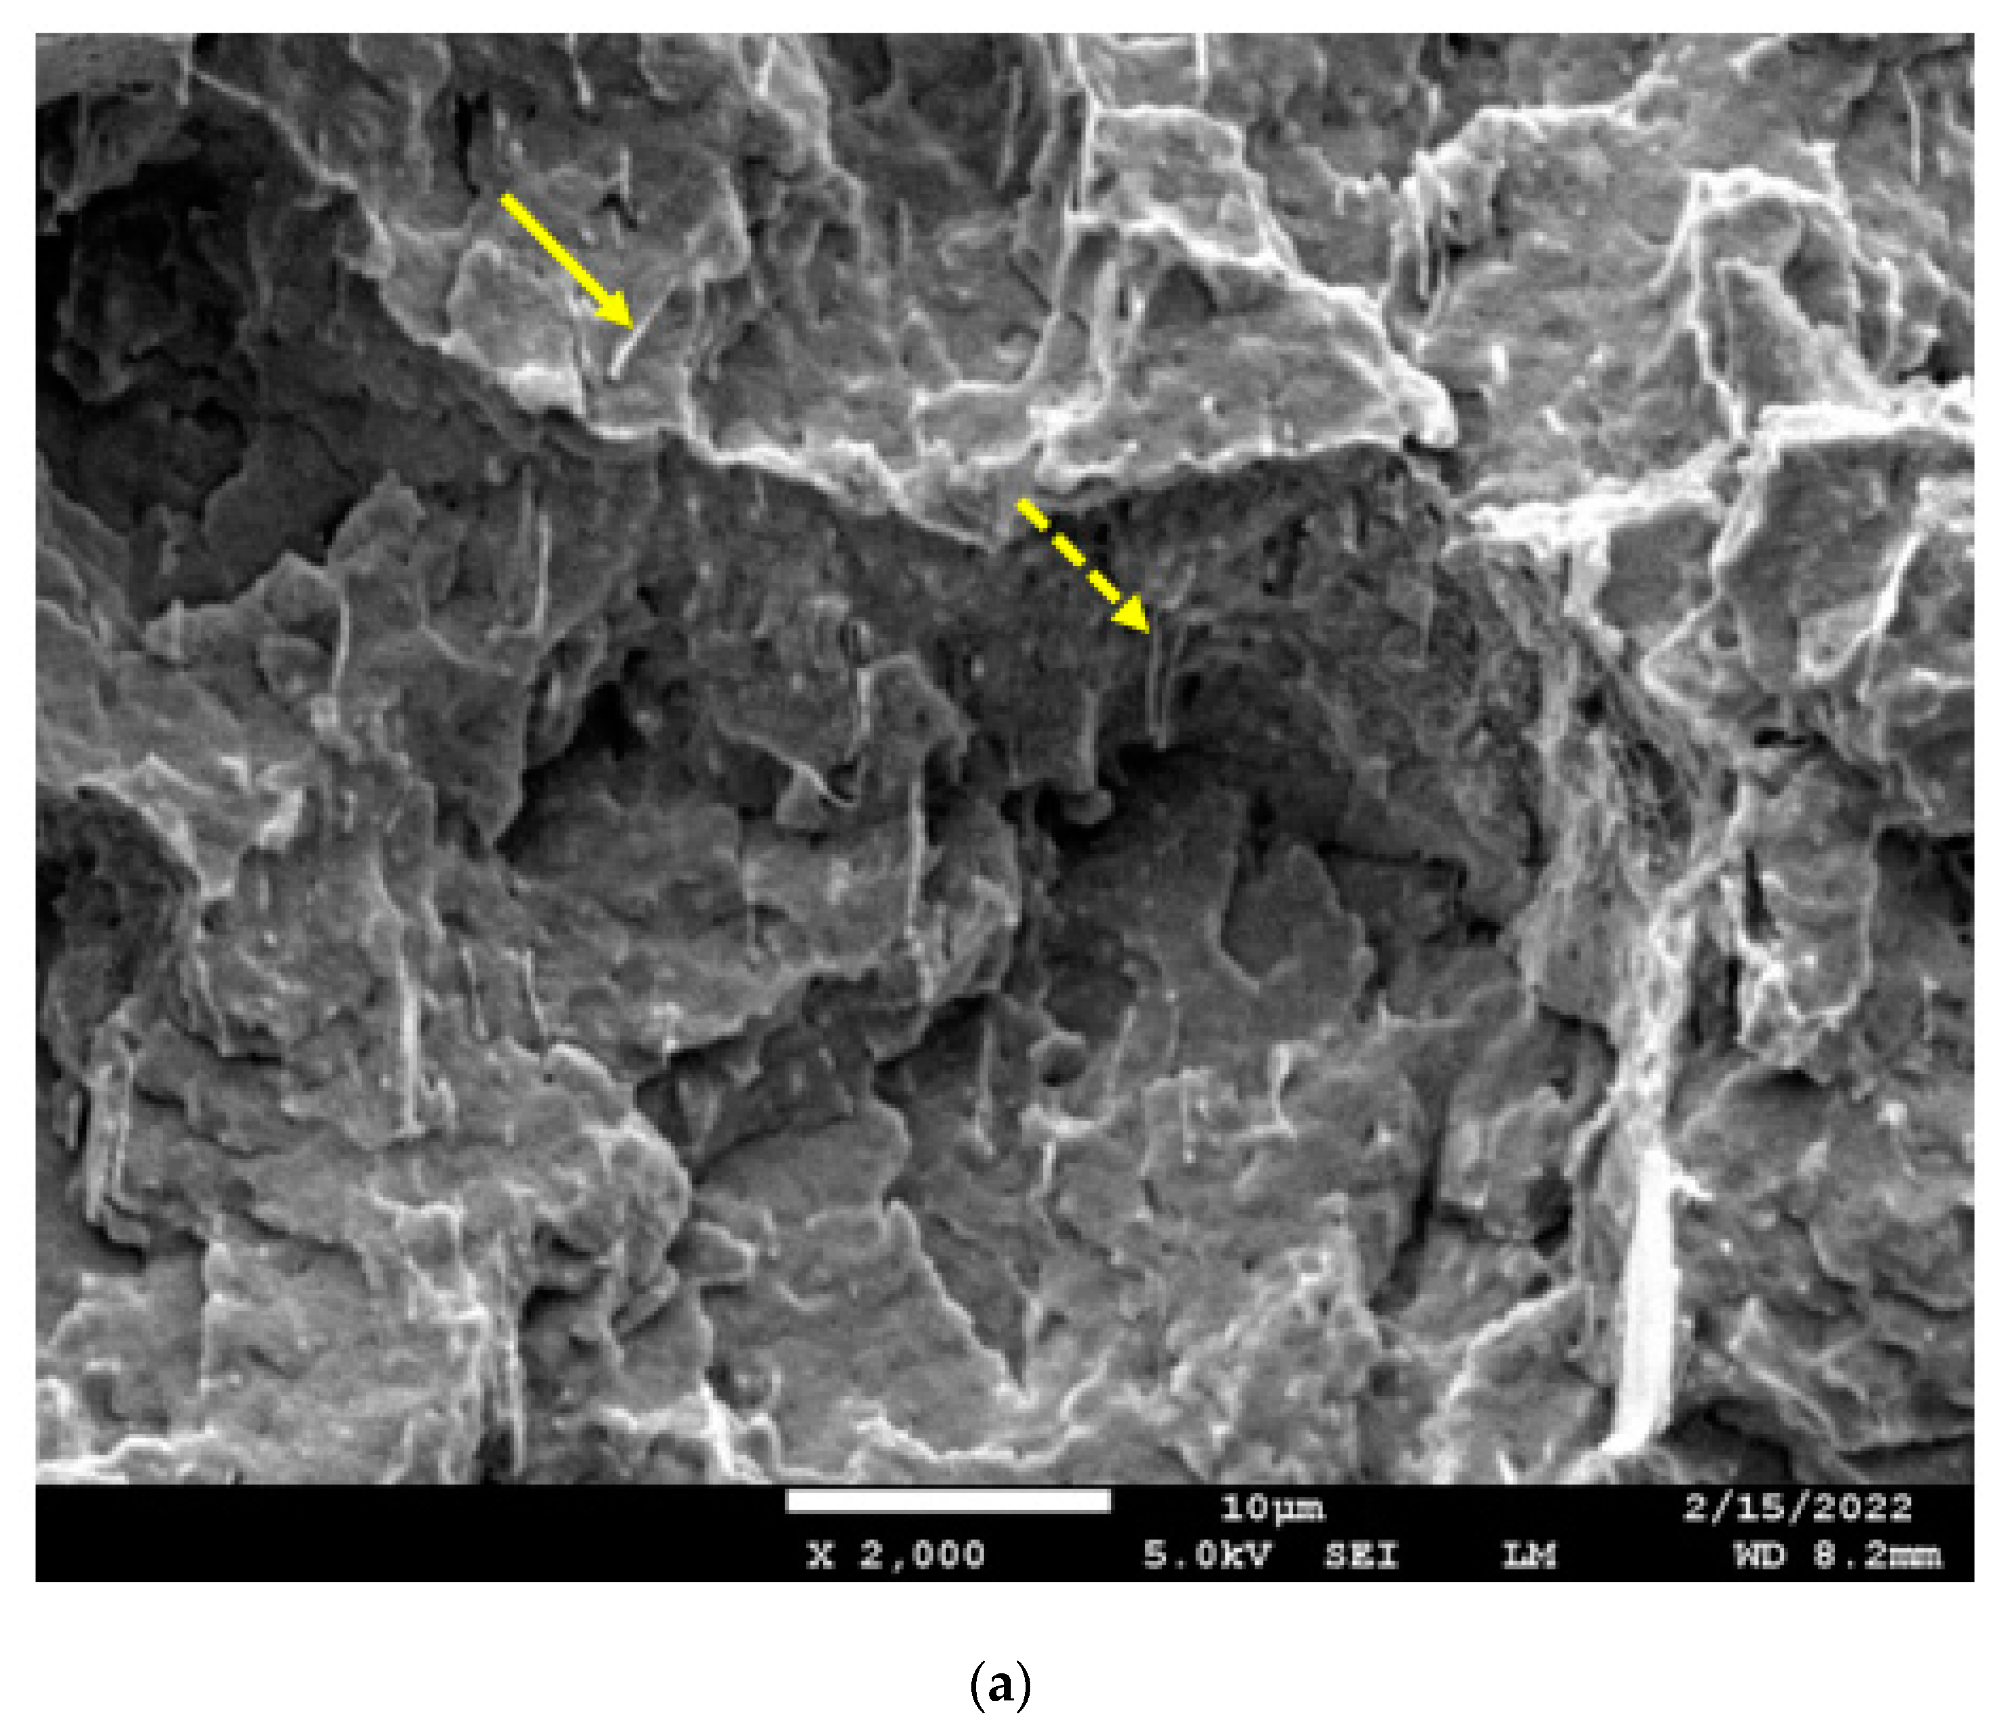 (a) SEM image of the cryo-fracture surface of a bar of the 60/40 PBT/PET blend with 10 vol.% Al flakes. The platelets are seen edgewise. The rectangle in the left corner is the cross-section of the bar (not to scale) and is placed to visualise the platelet orientation relative to the bar. The arrow shows polymer coating on a platelet. Dotted arrow shows a folded platelet. The white size bar = 10 µm. (b) SEM image of the cryo-fracture surface of a bar of the 60/40 PBT/PET blend with 25 vol.% of Al nano platelets. The platelets are seen edgewise. The arrow shows a folded platelet with polymer coating. The white size bar = 10 µm.